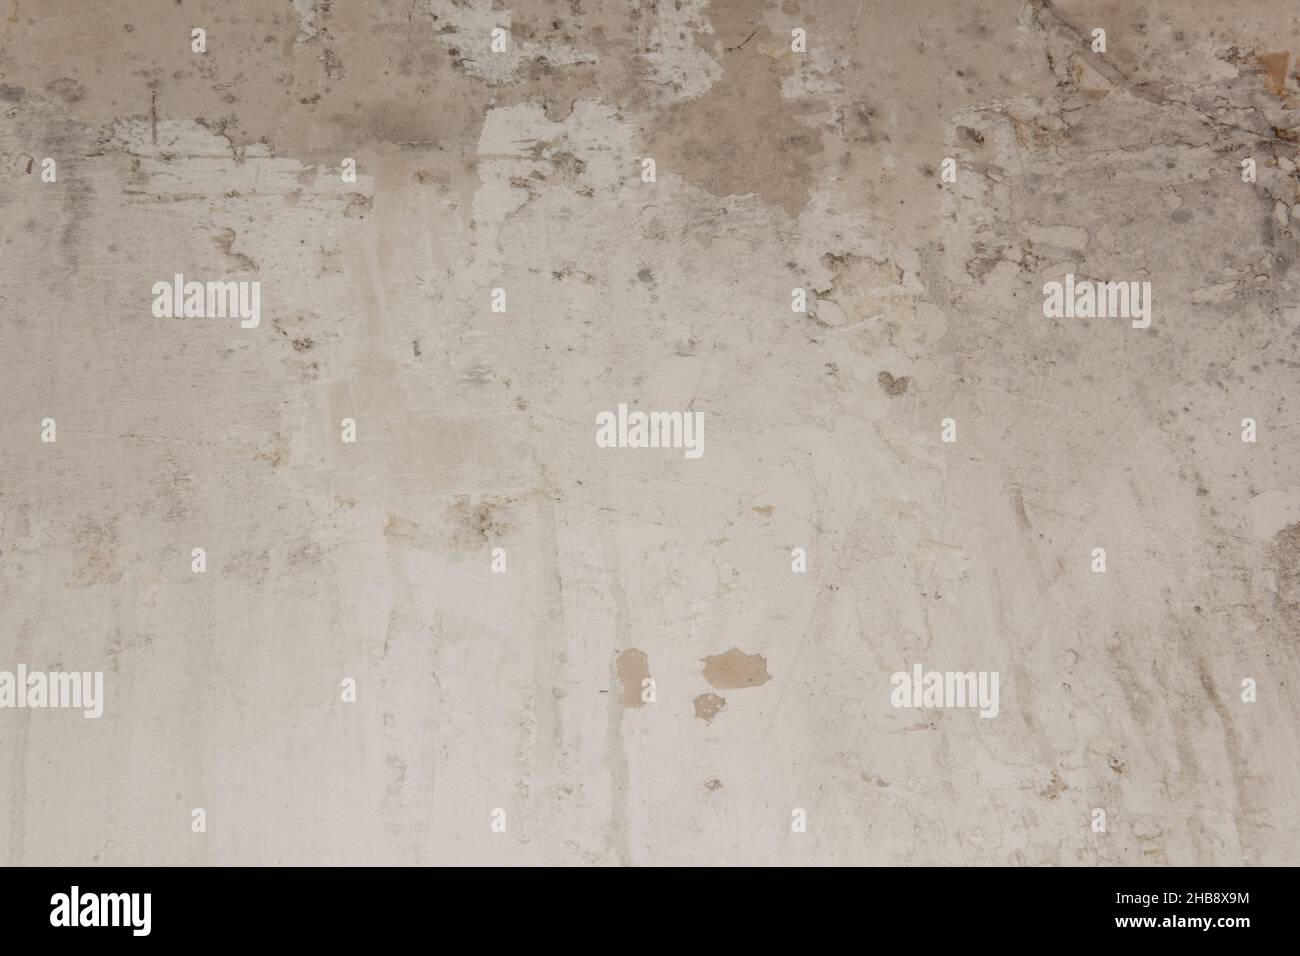 Shabby putty background. Vintage ancient background. Light shade textured old wall Stock Photo